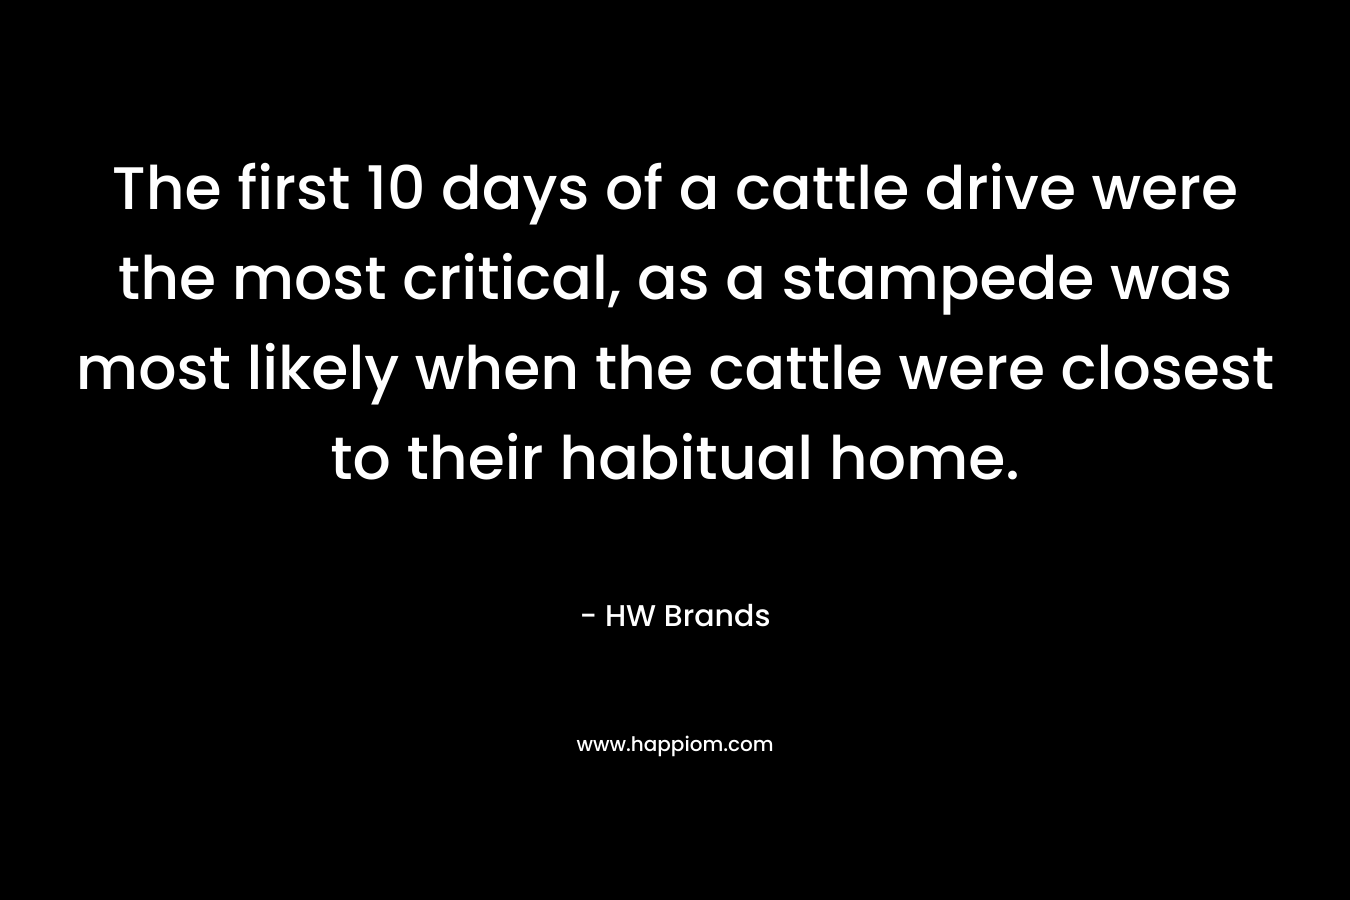 The first 10 days of a cattle drive were the most critical, as a stampede was most likely when the cattle were closest to their habitual home. – HW Brands